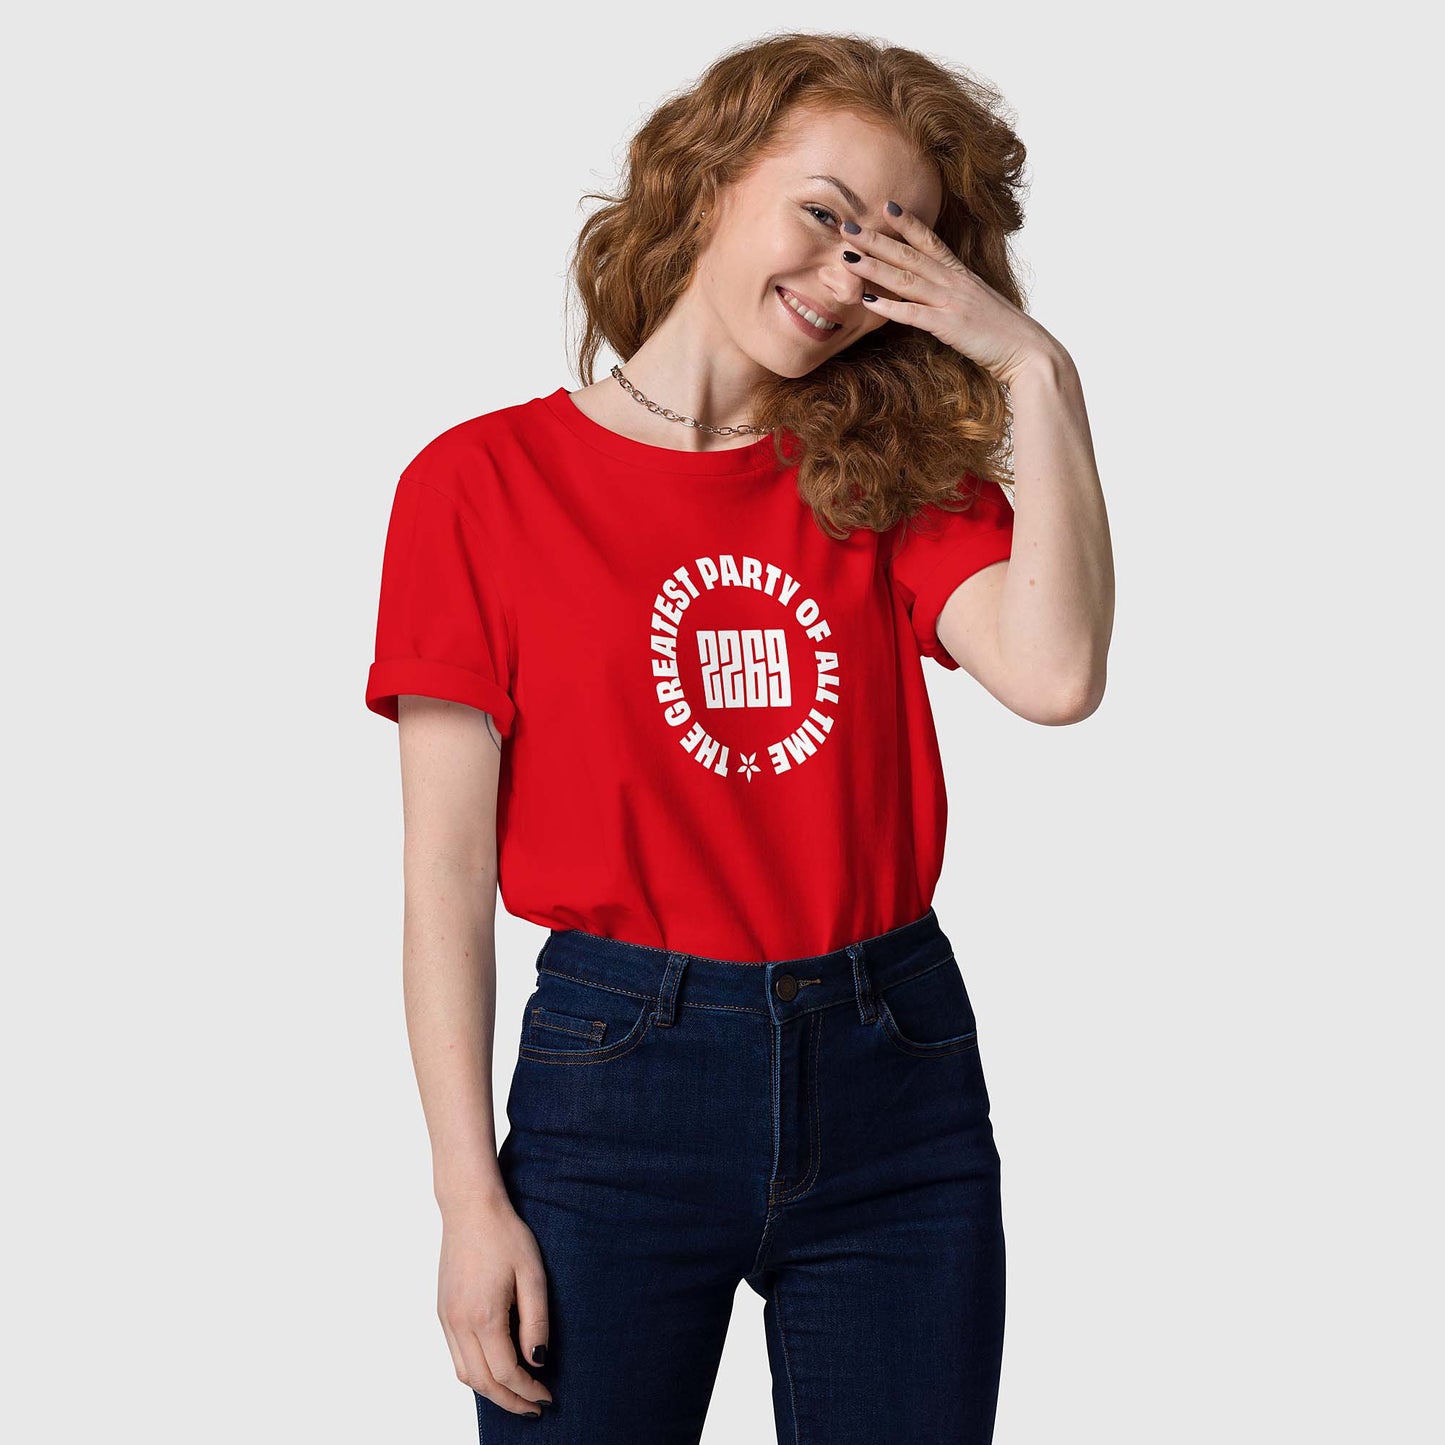 Unisex red organic cotton t-shirt with English 2269 party circle